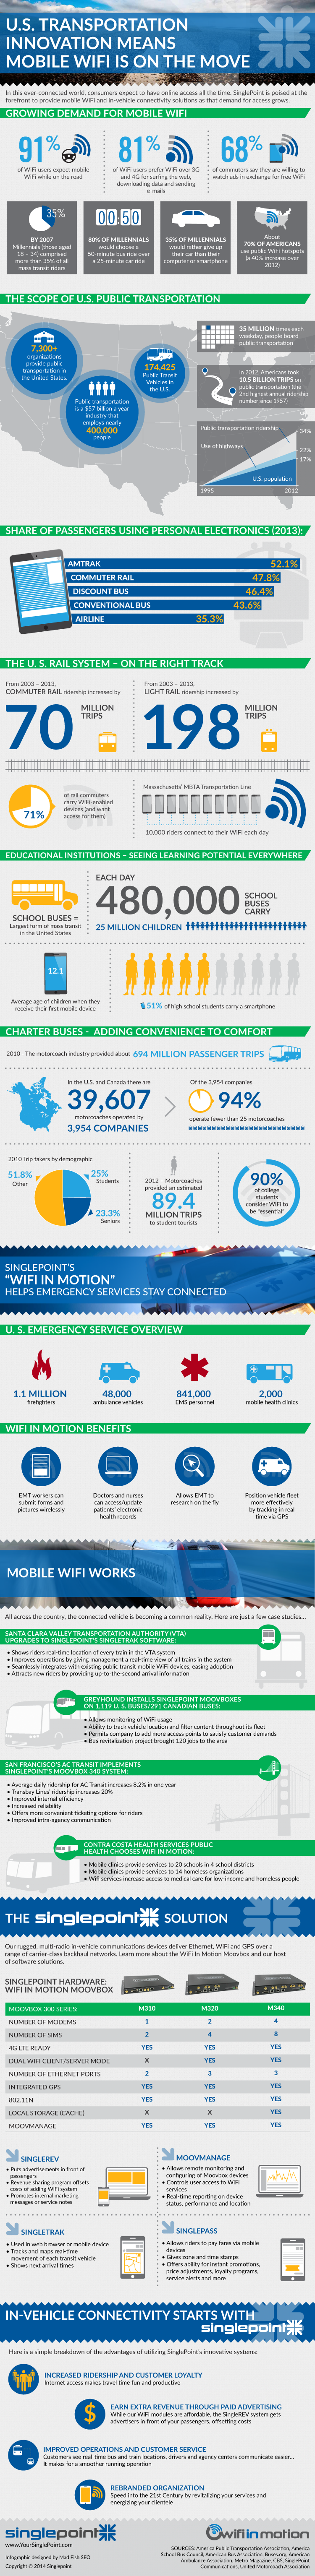 U.S. Transportation Innovation Means Mobile WiFi Is On the Move